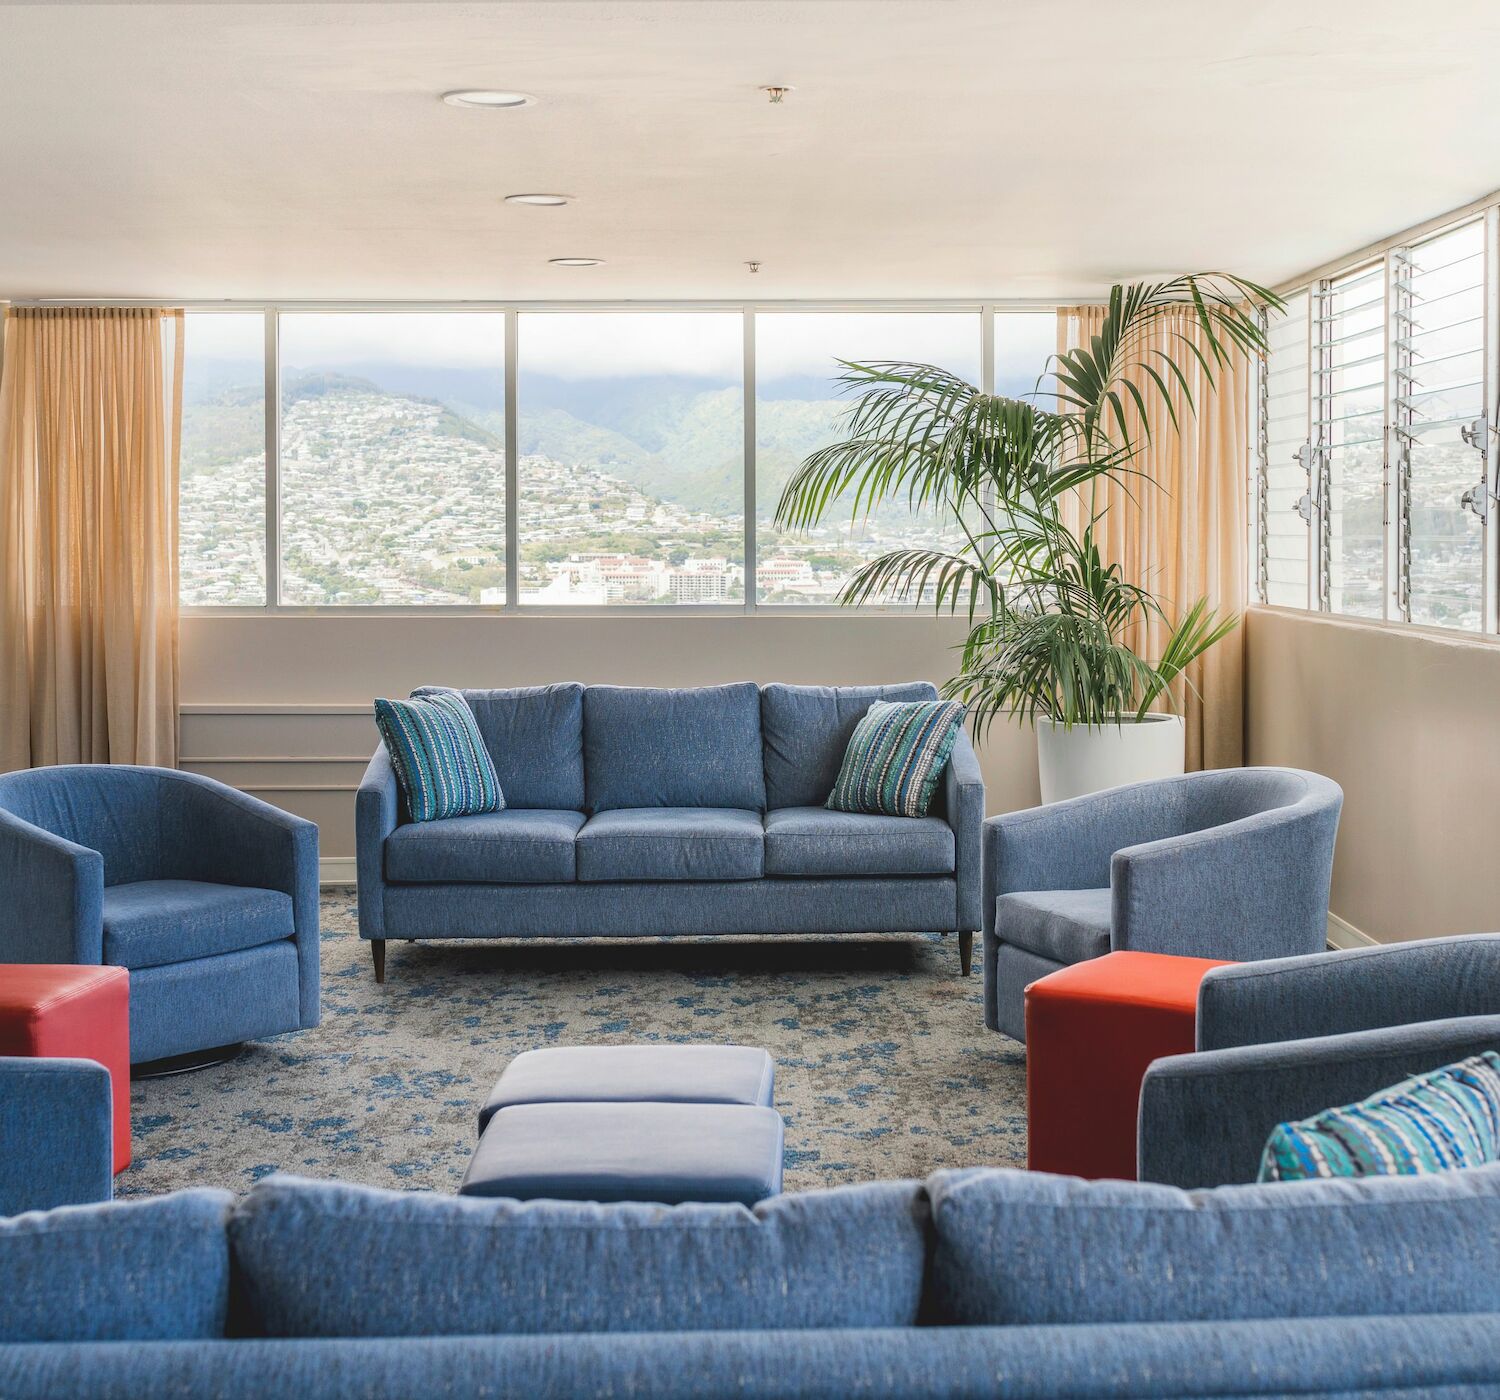 A bright room with blue sofas, orange stools, potted plants, and large windows showcasing a scenic mountain view, creating a relaxing ambiance.